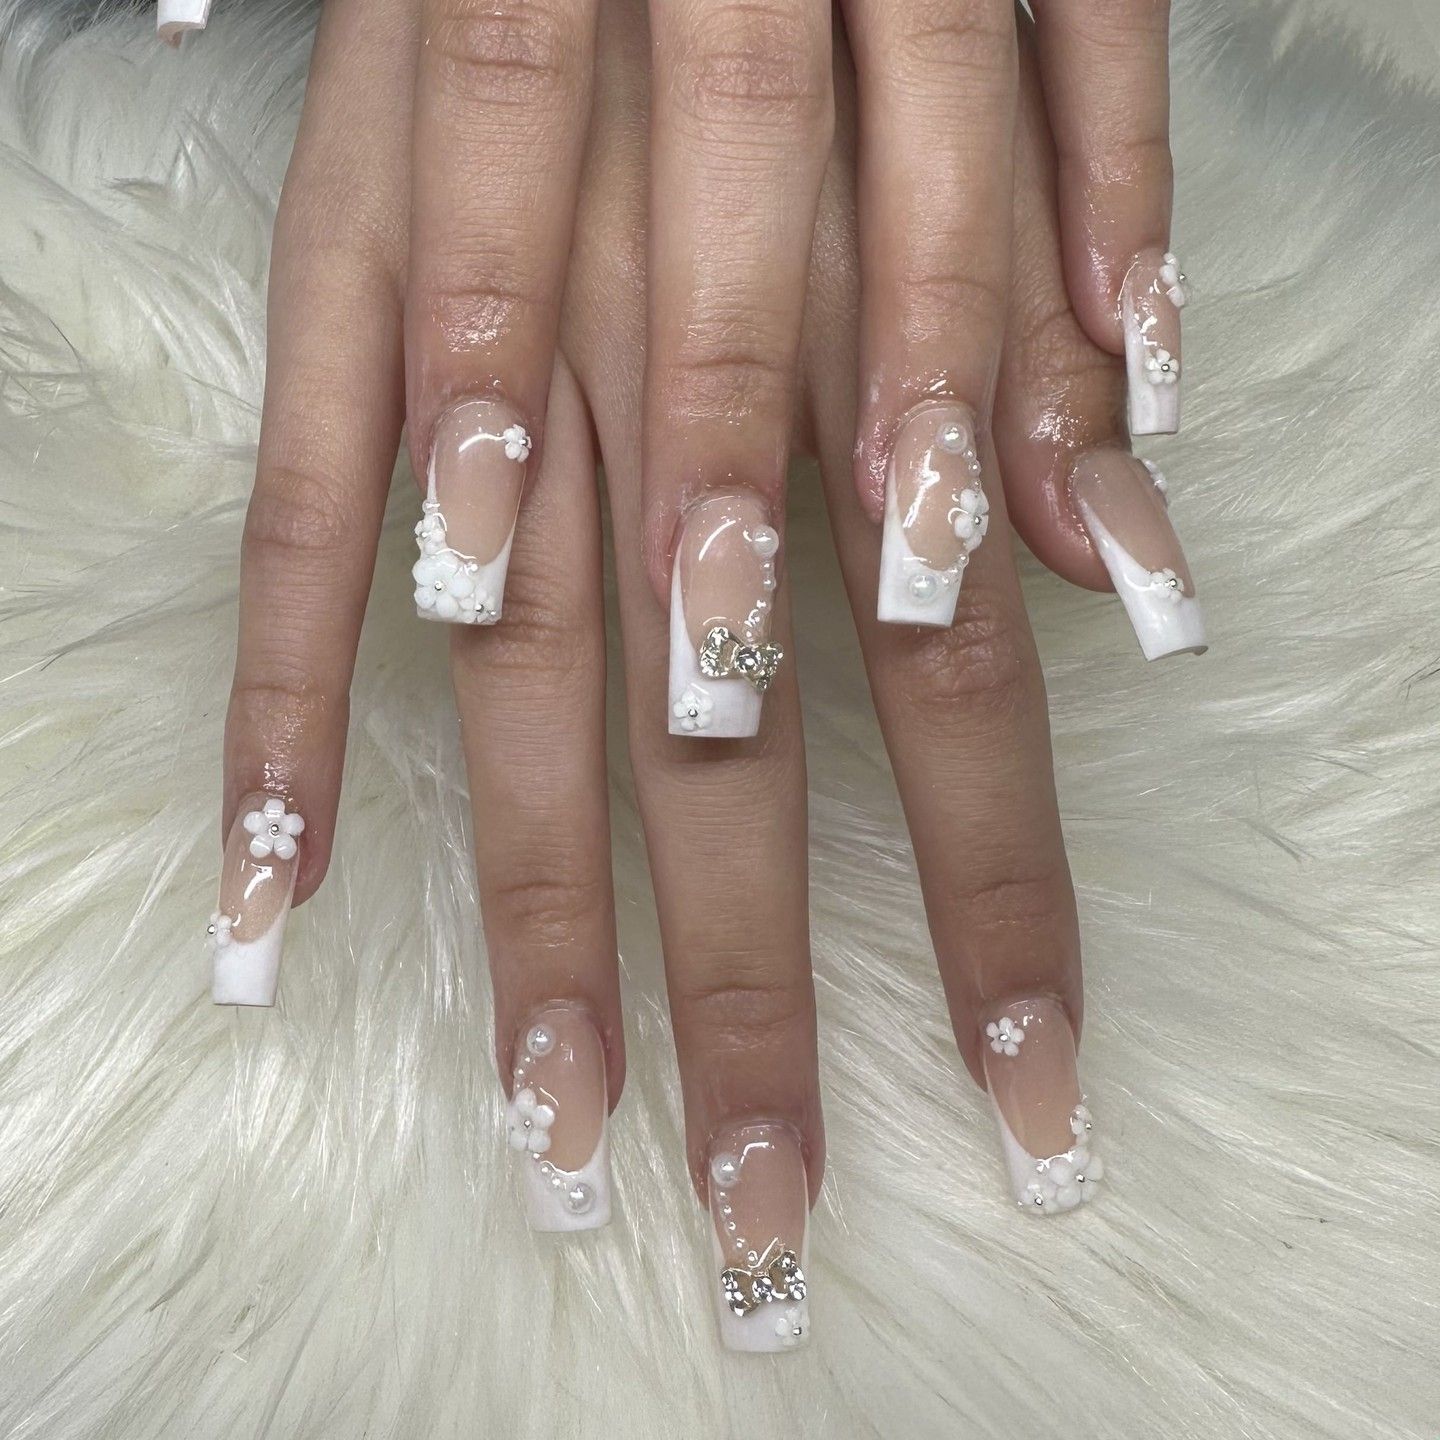 37+ Chic Ideas for White Short Nails With Diamonds - Nail Designs Daily